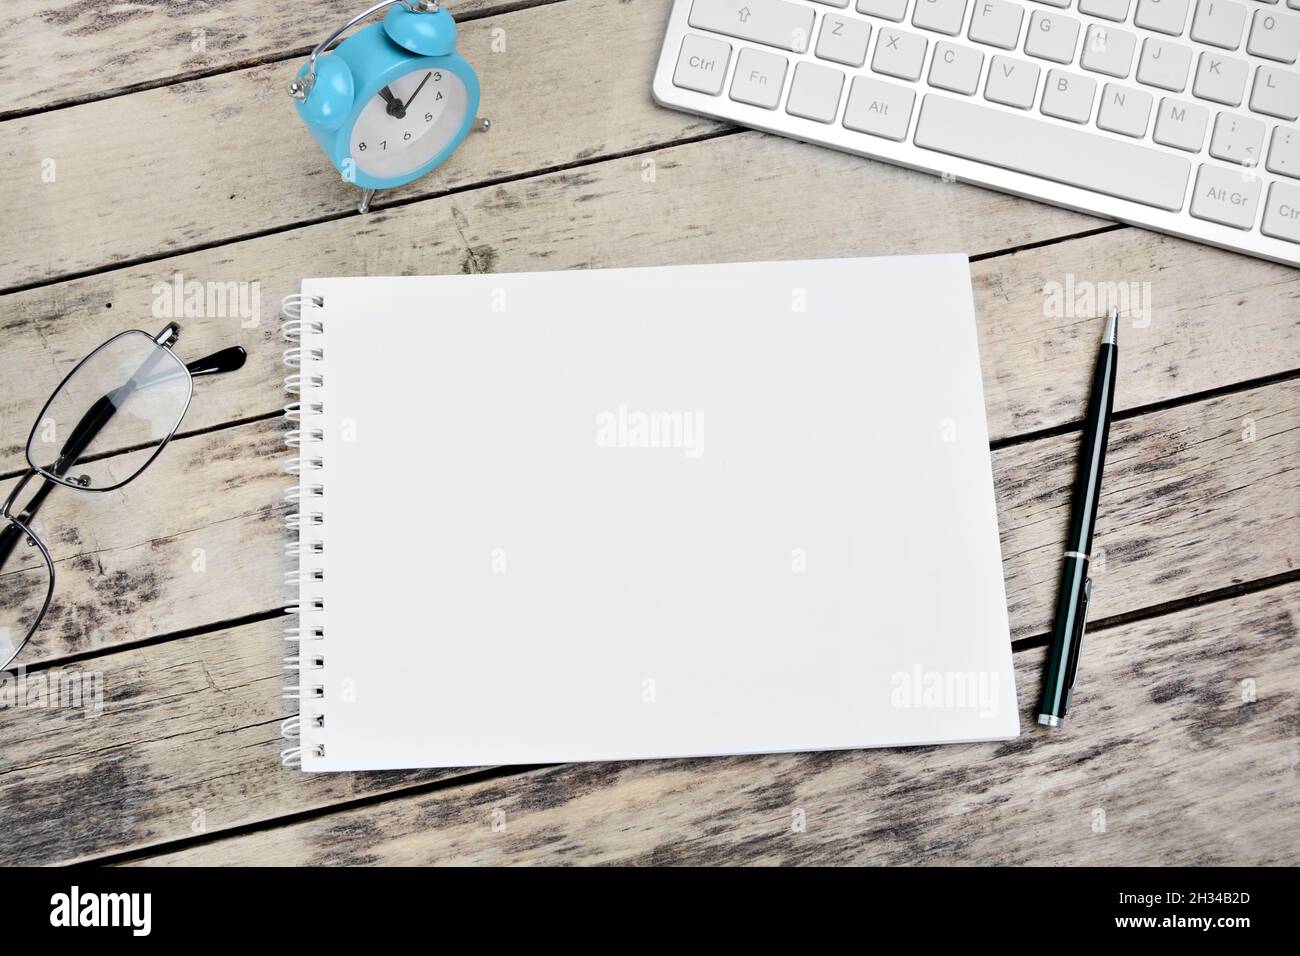 Blank notepad, glasses, keyboard, pen and glasses on a desk Stock Photo